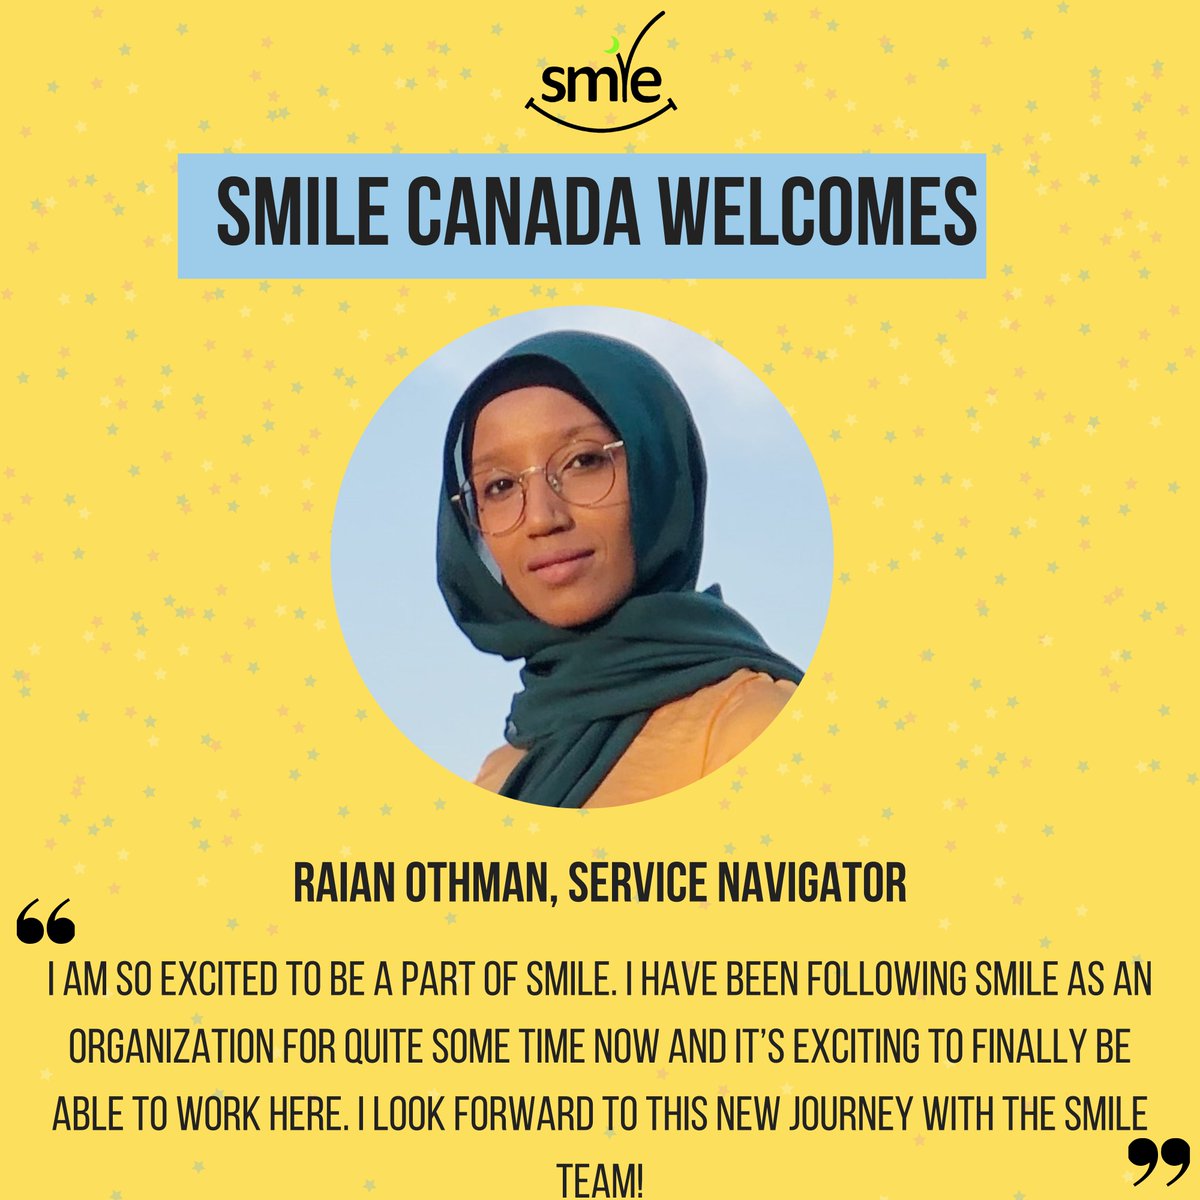 Meet Raian, SMILE's newest team member! In her role as service navigator, Raian corresponds with families, children and youth in Arabic in English. We are so excited to have you on the team. Let's give Raian a warm SMILE welcome!! #UnitedWeSMILE #InclusionForALL #SMILETeam